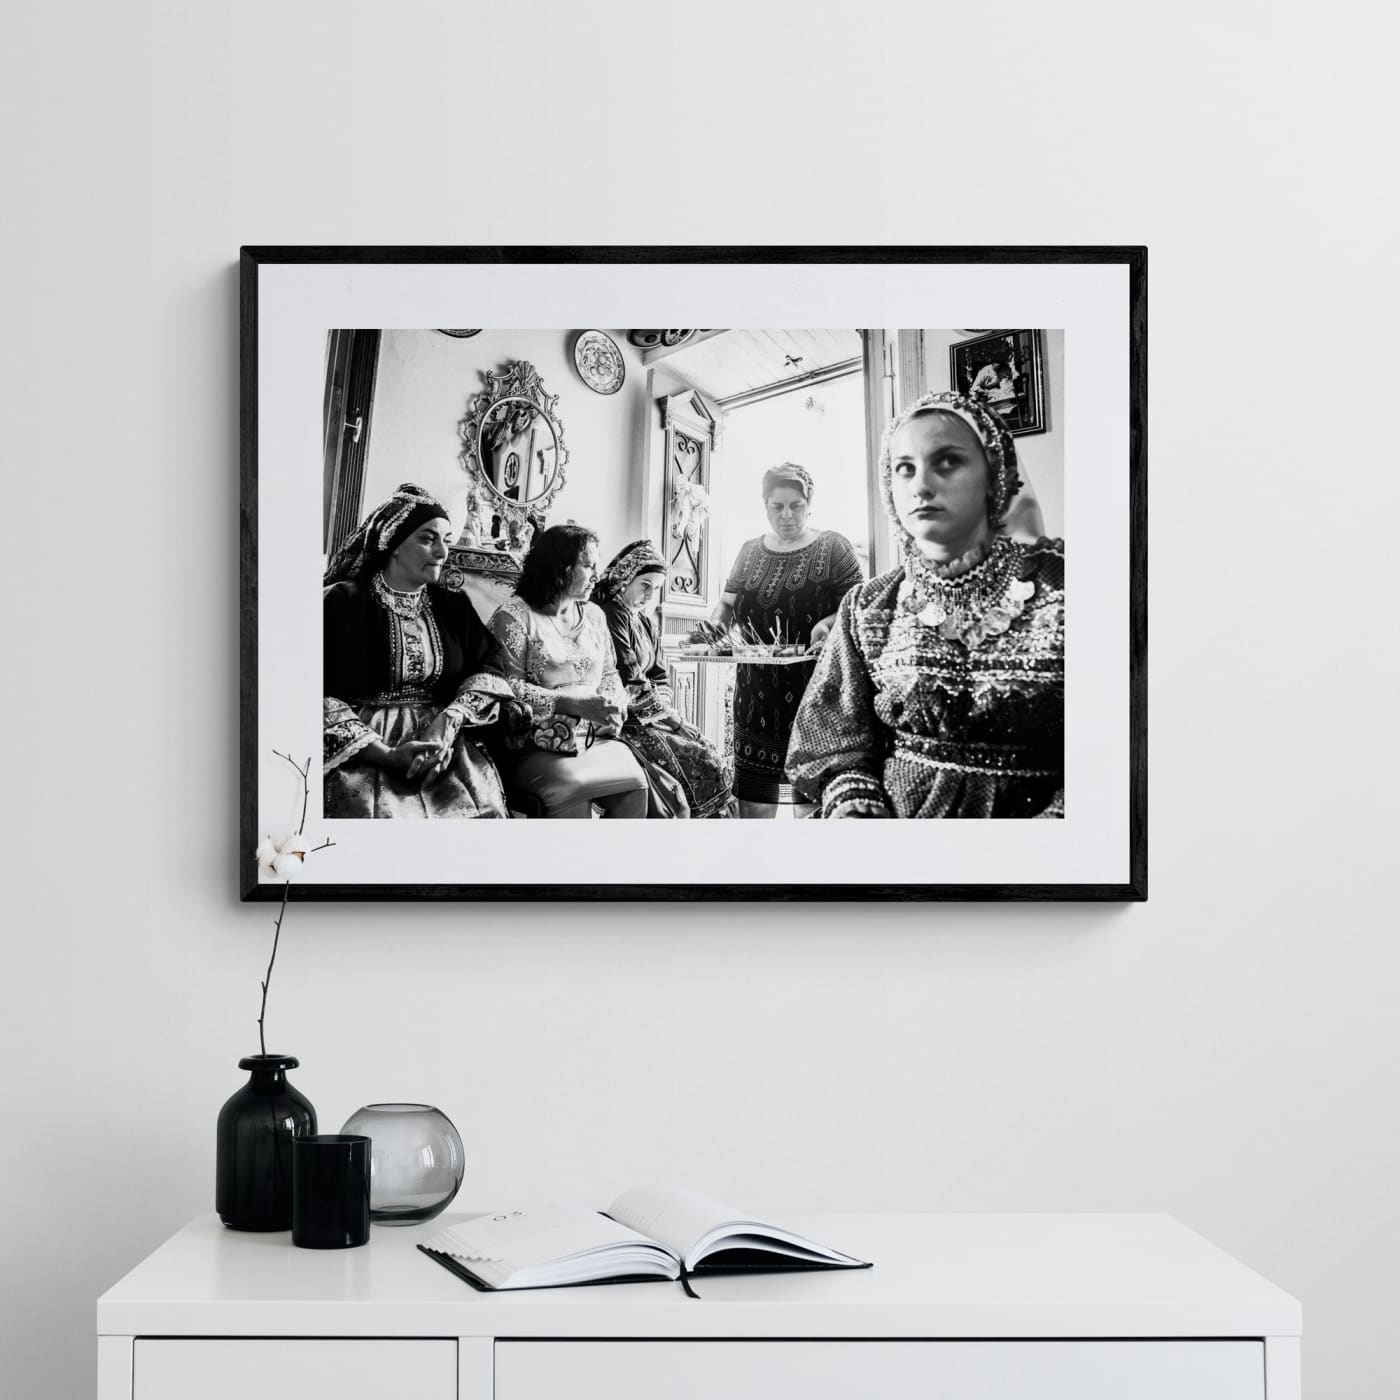 Black and White Photography Wall Art Greece | Sweetmeats during a wedding Olympos Karpathos by George Tatakis - single framed photo